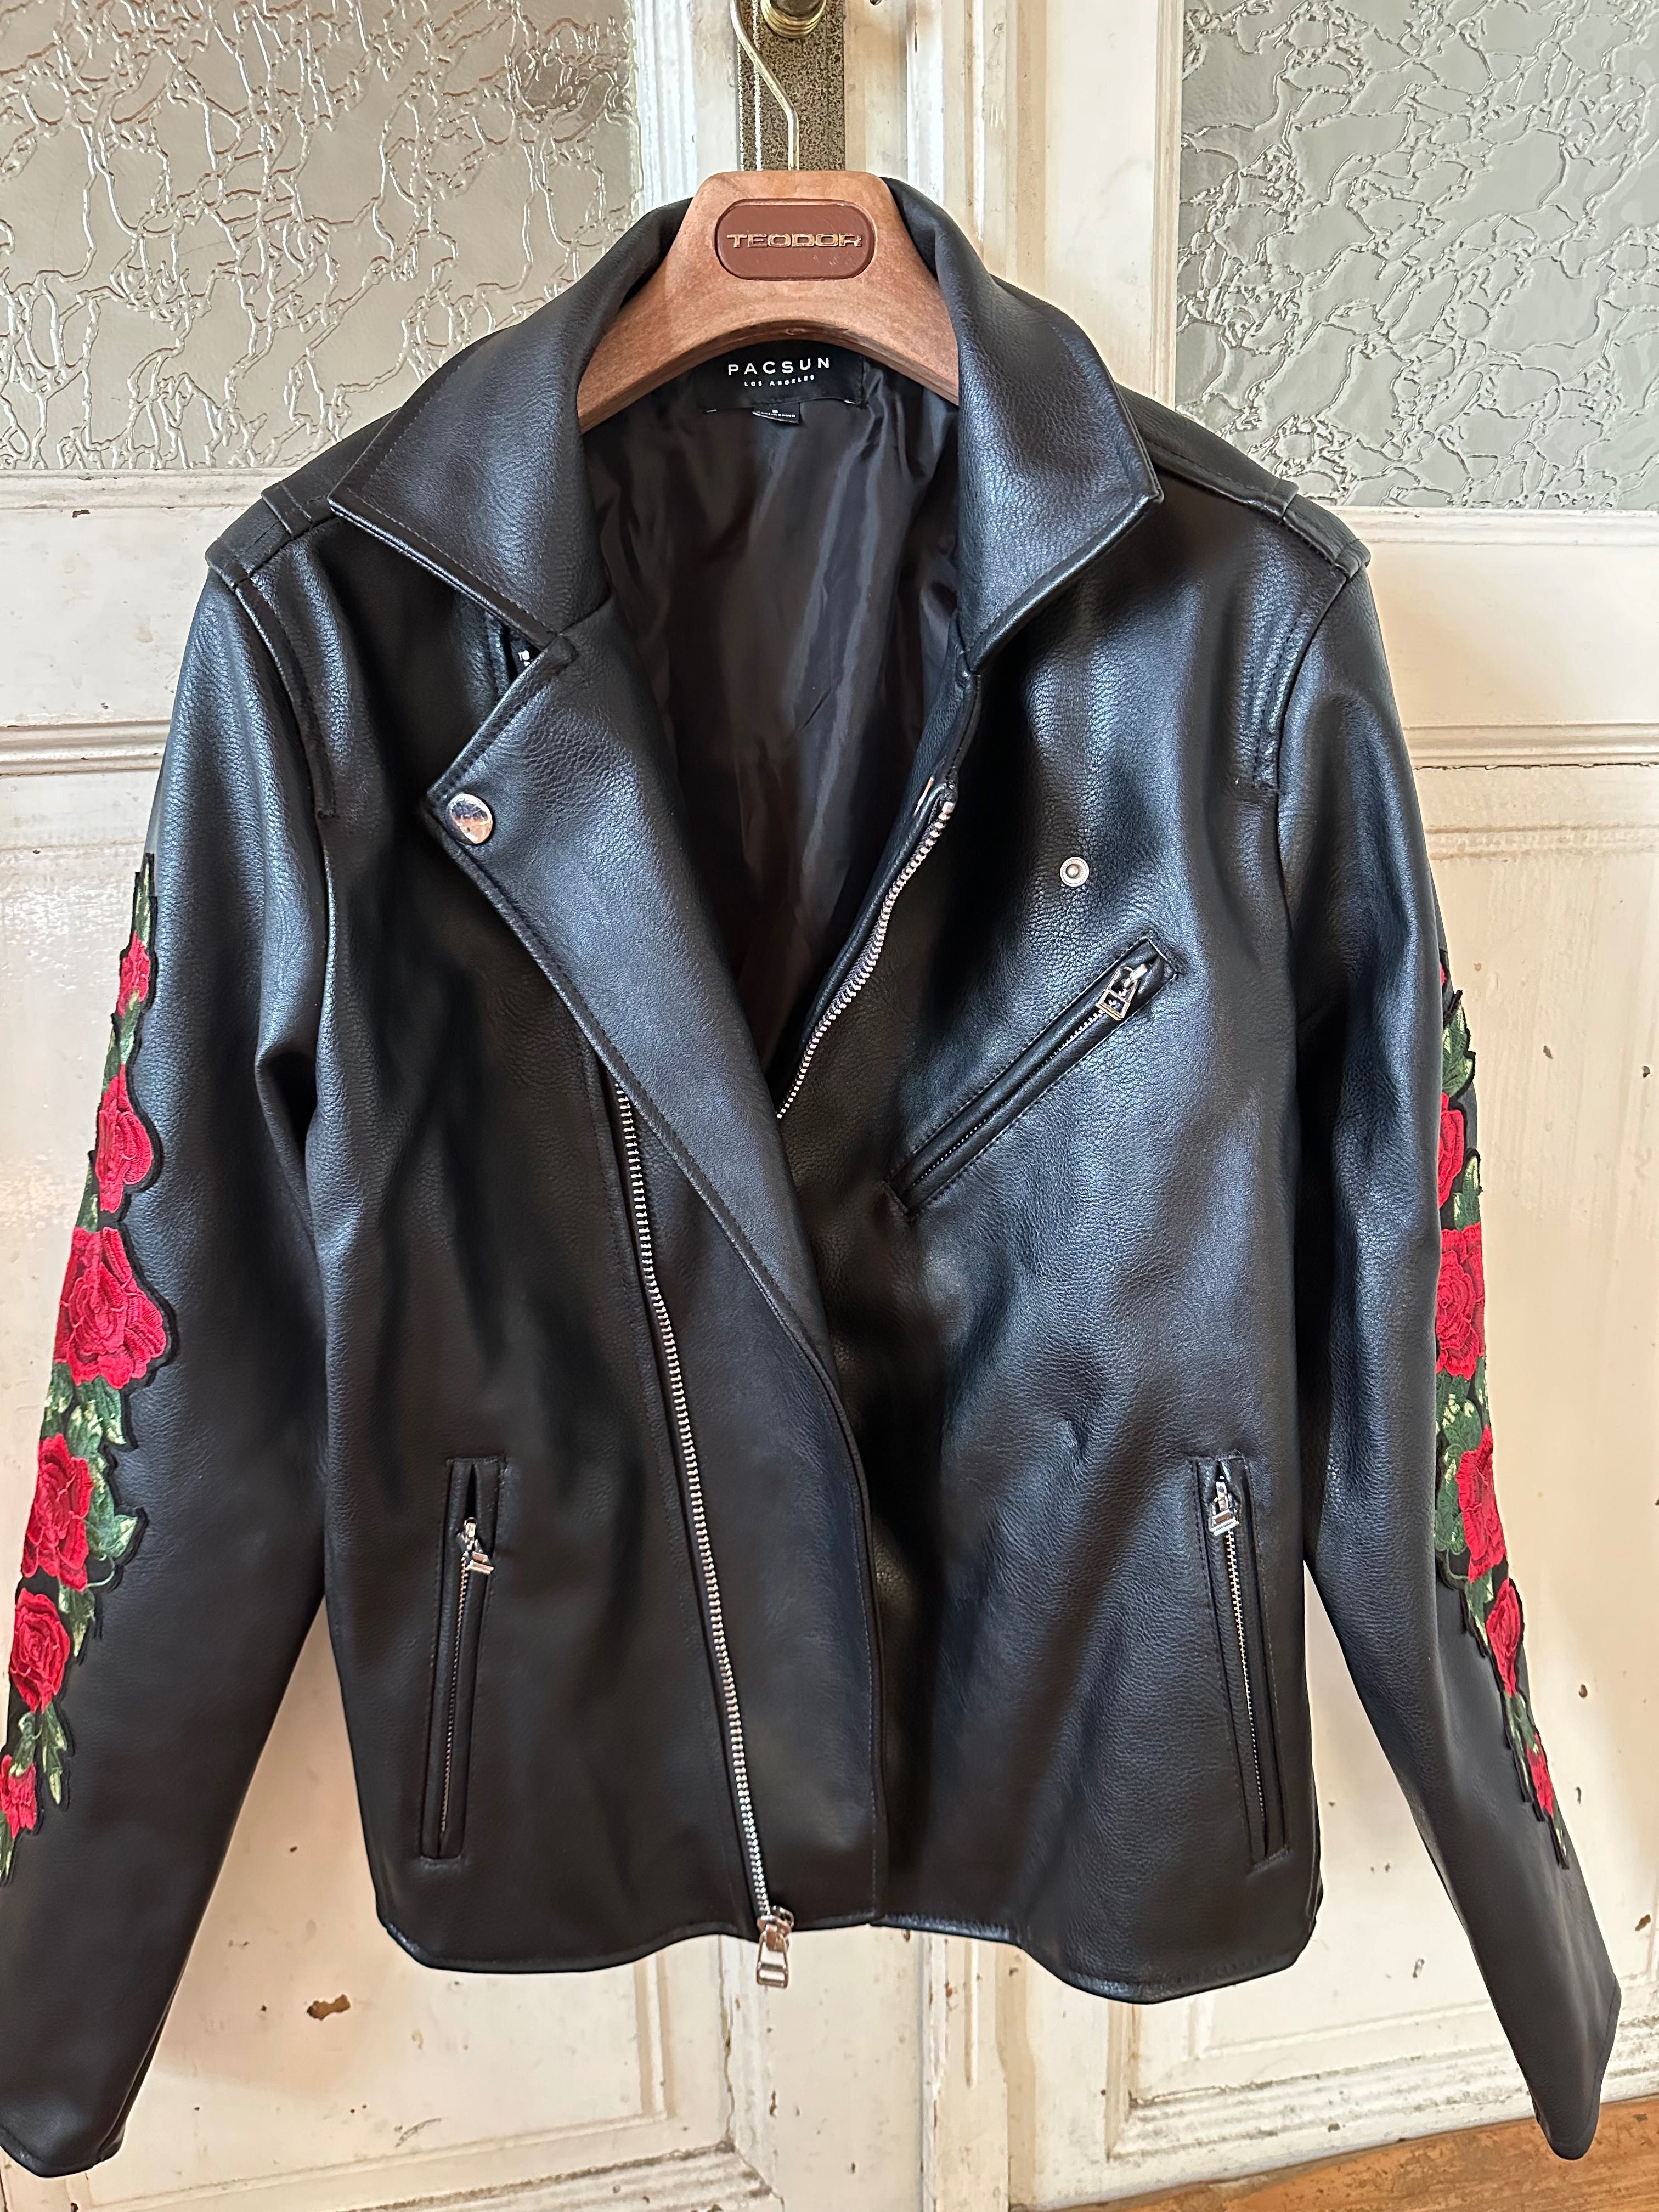 Pascun Los Angeles Leather Jacket